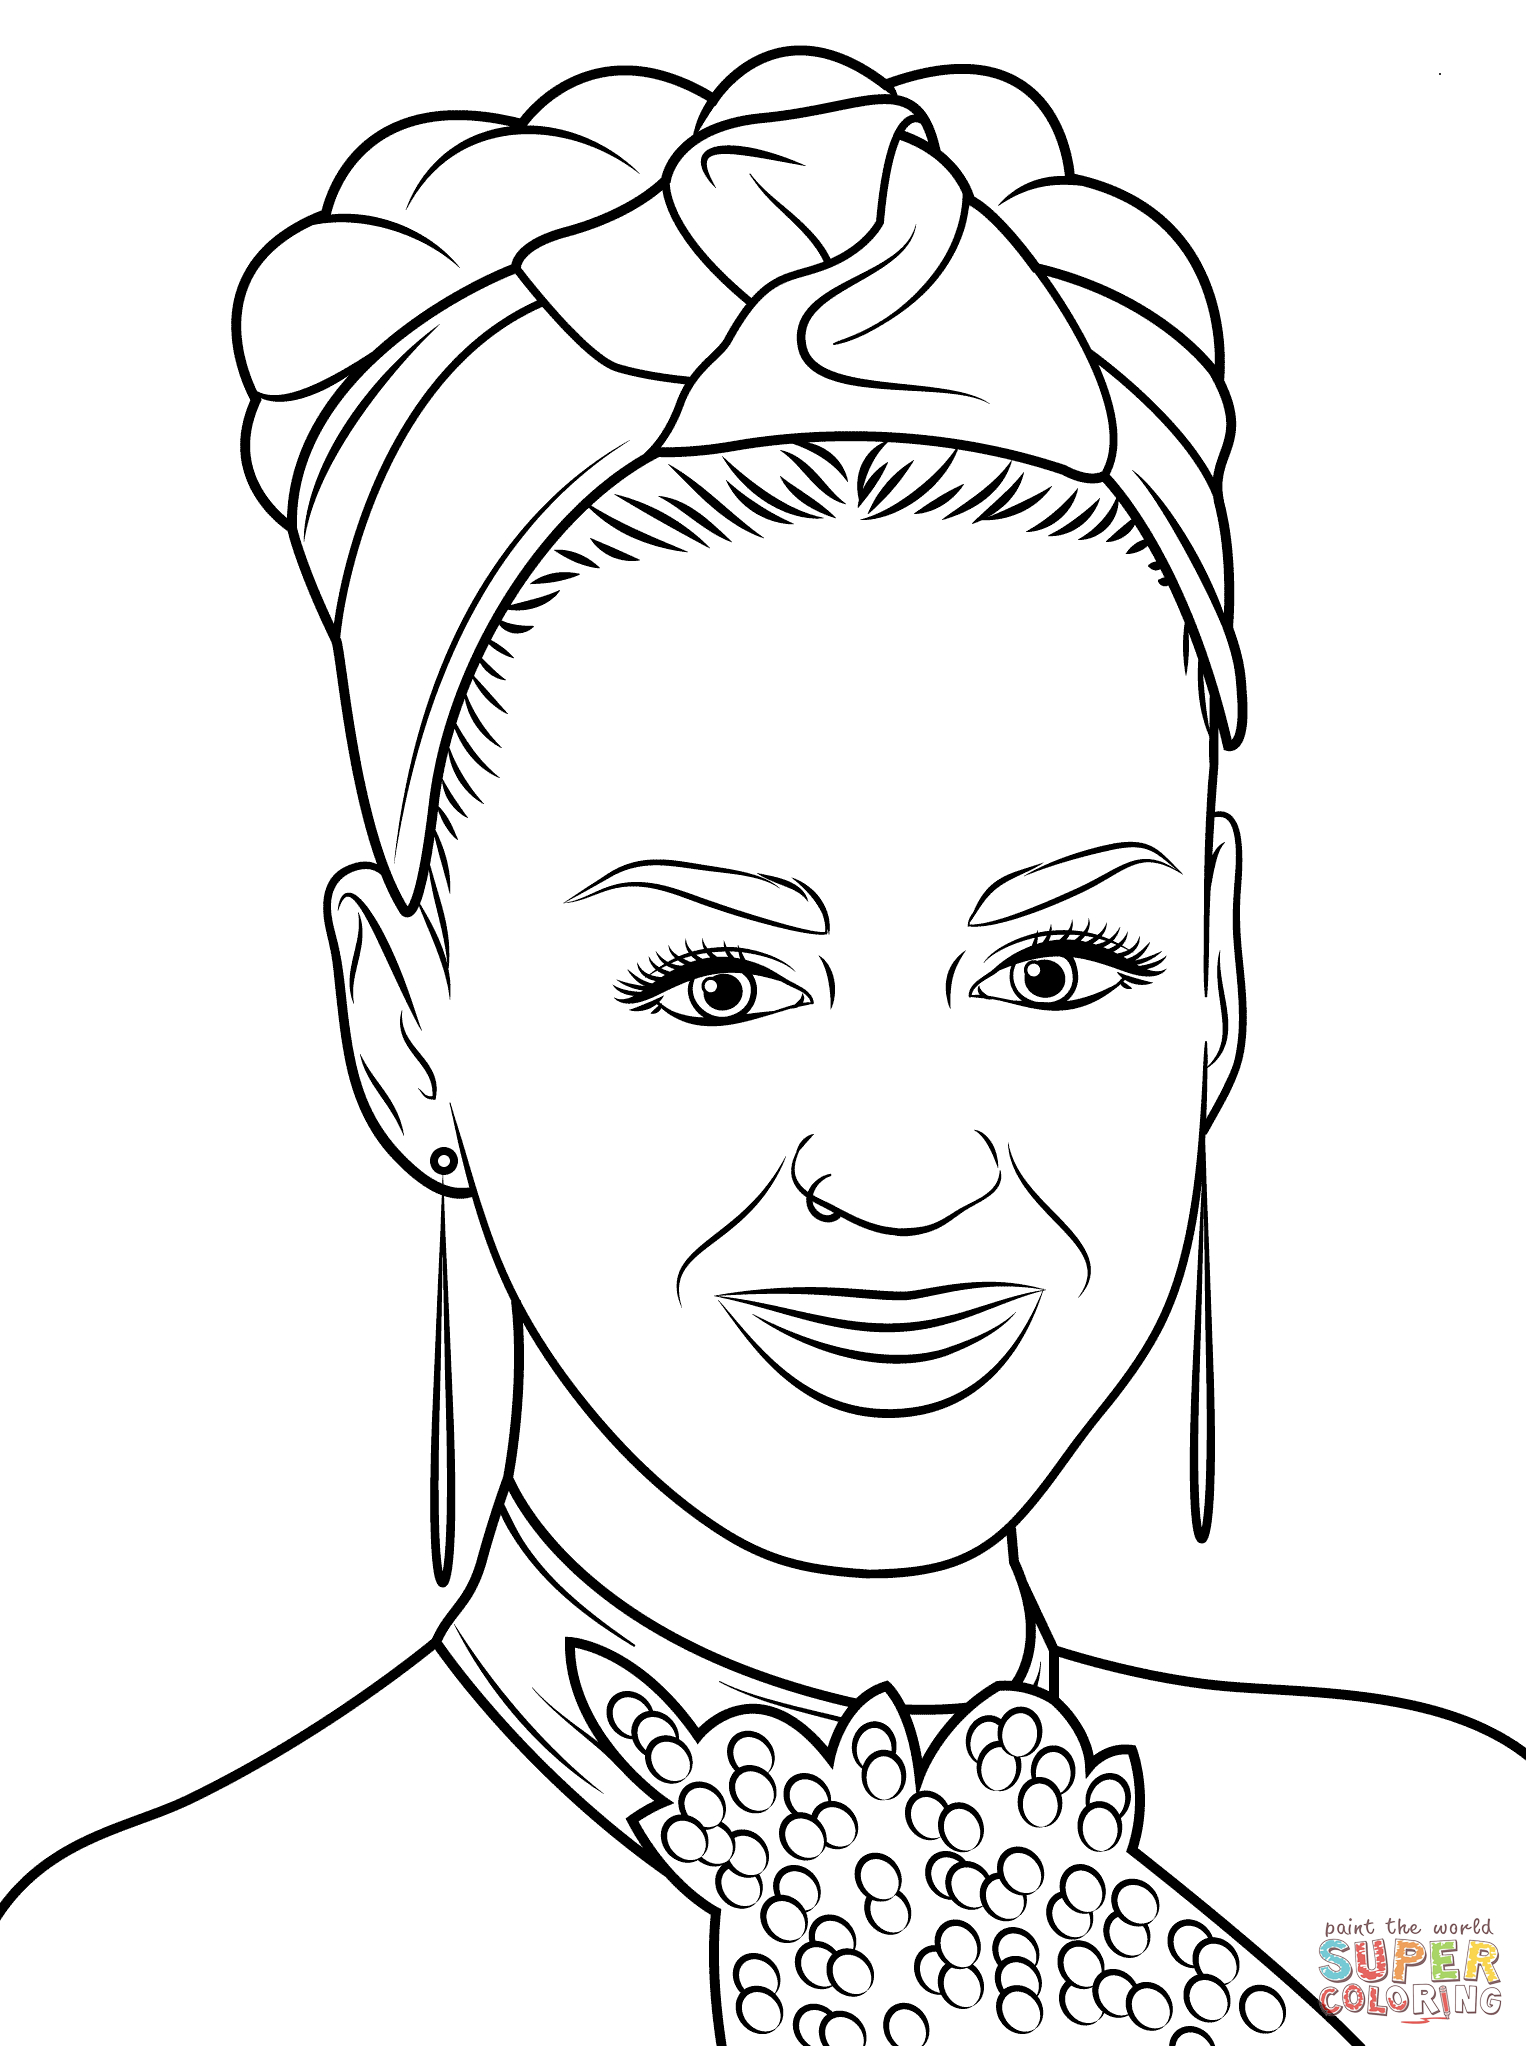 Nicki Minaj Coloring Pages Famous Singers And Musicians Coloring Pages Free Printable Pictures